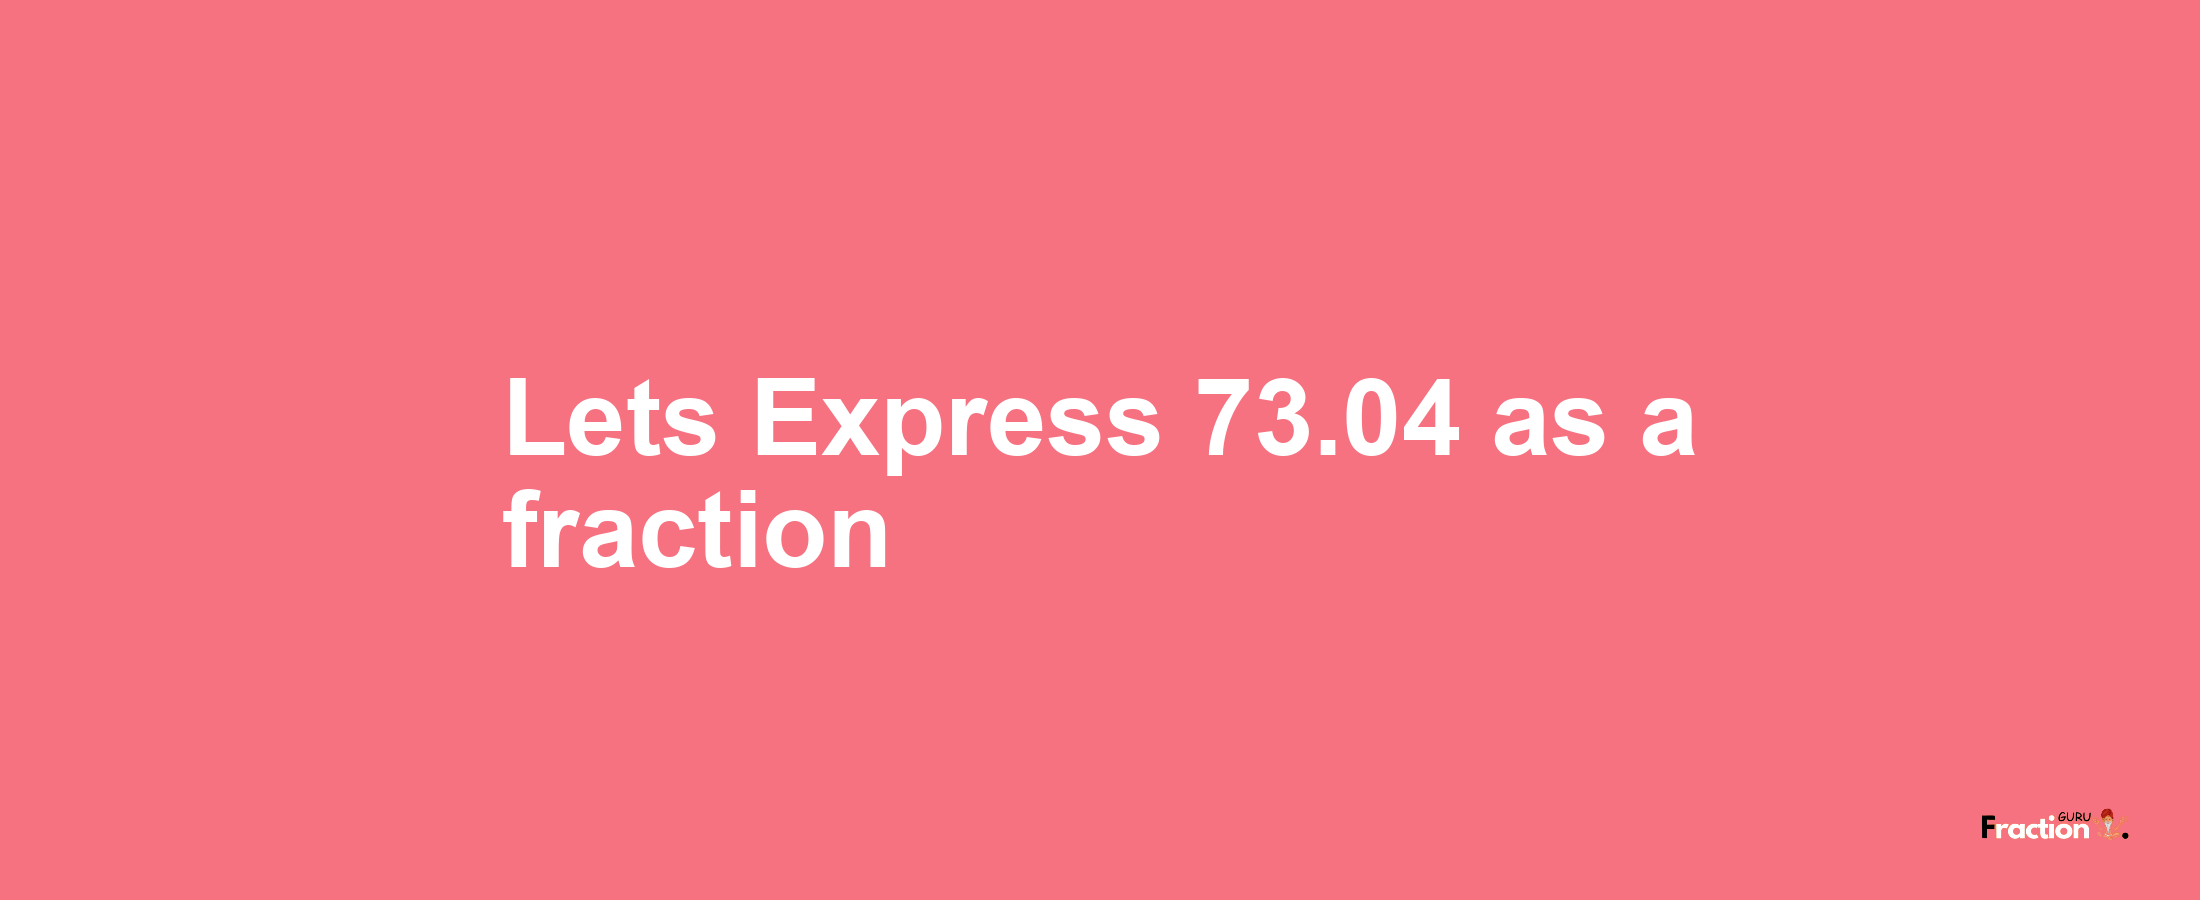 Lets Express 73.04 as afraction